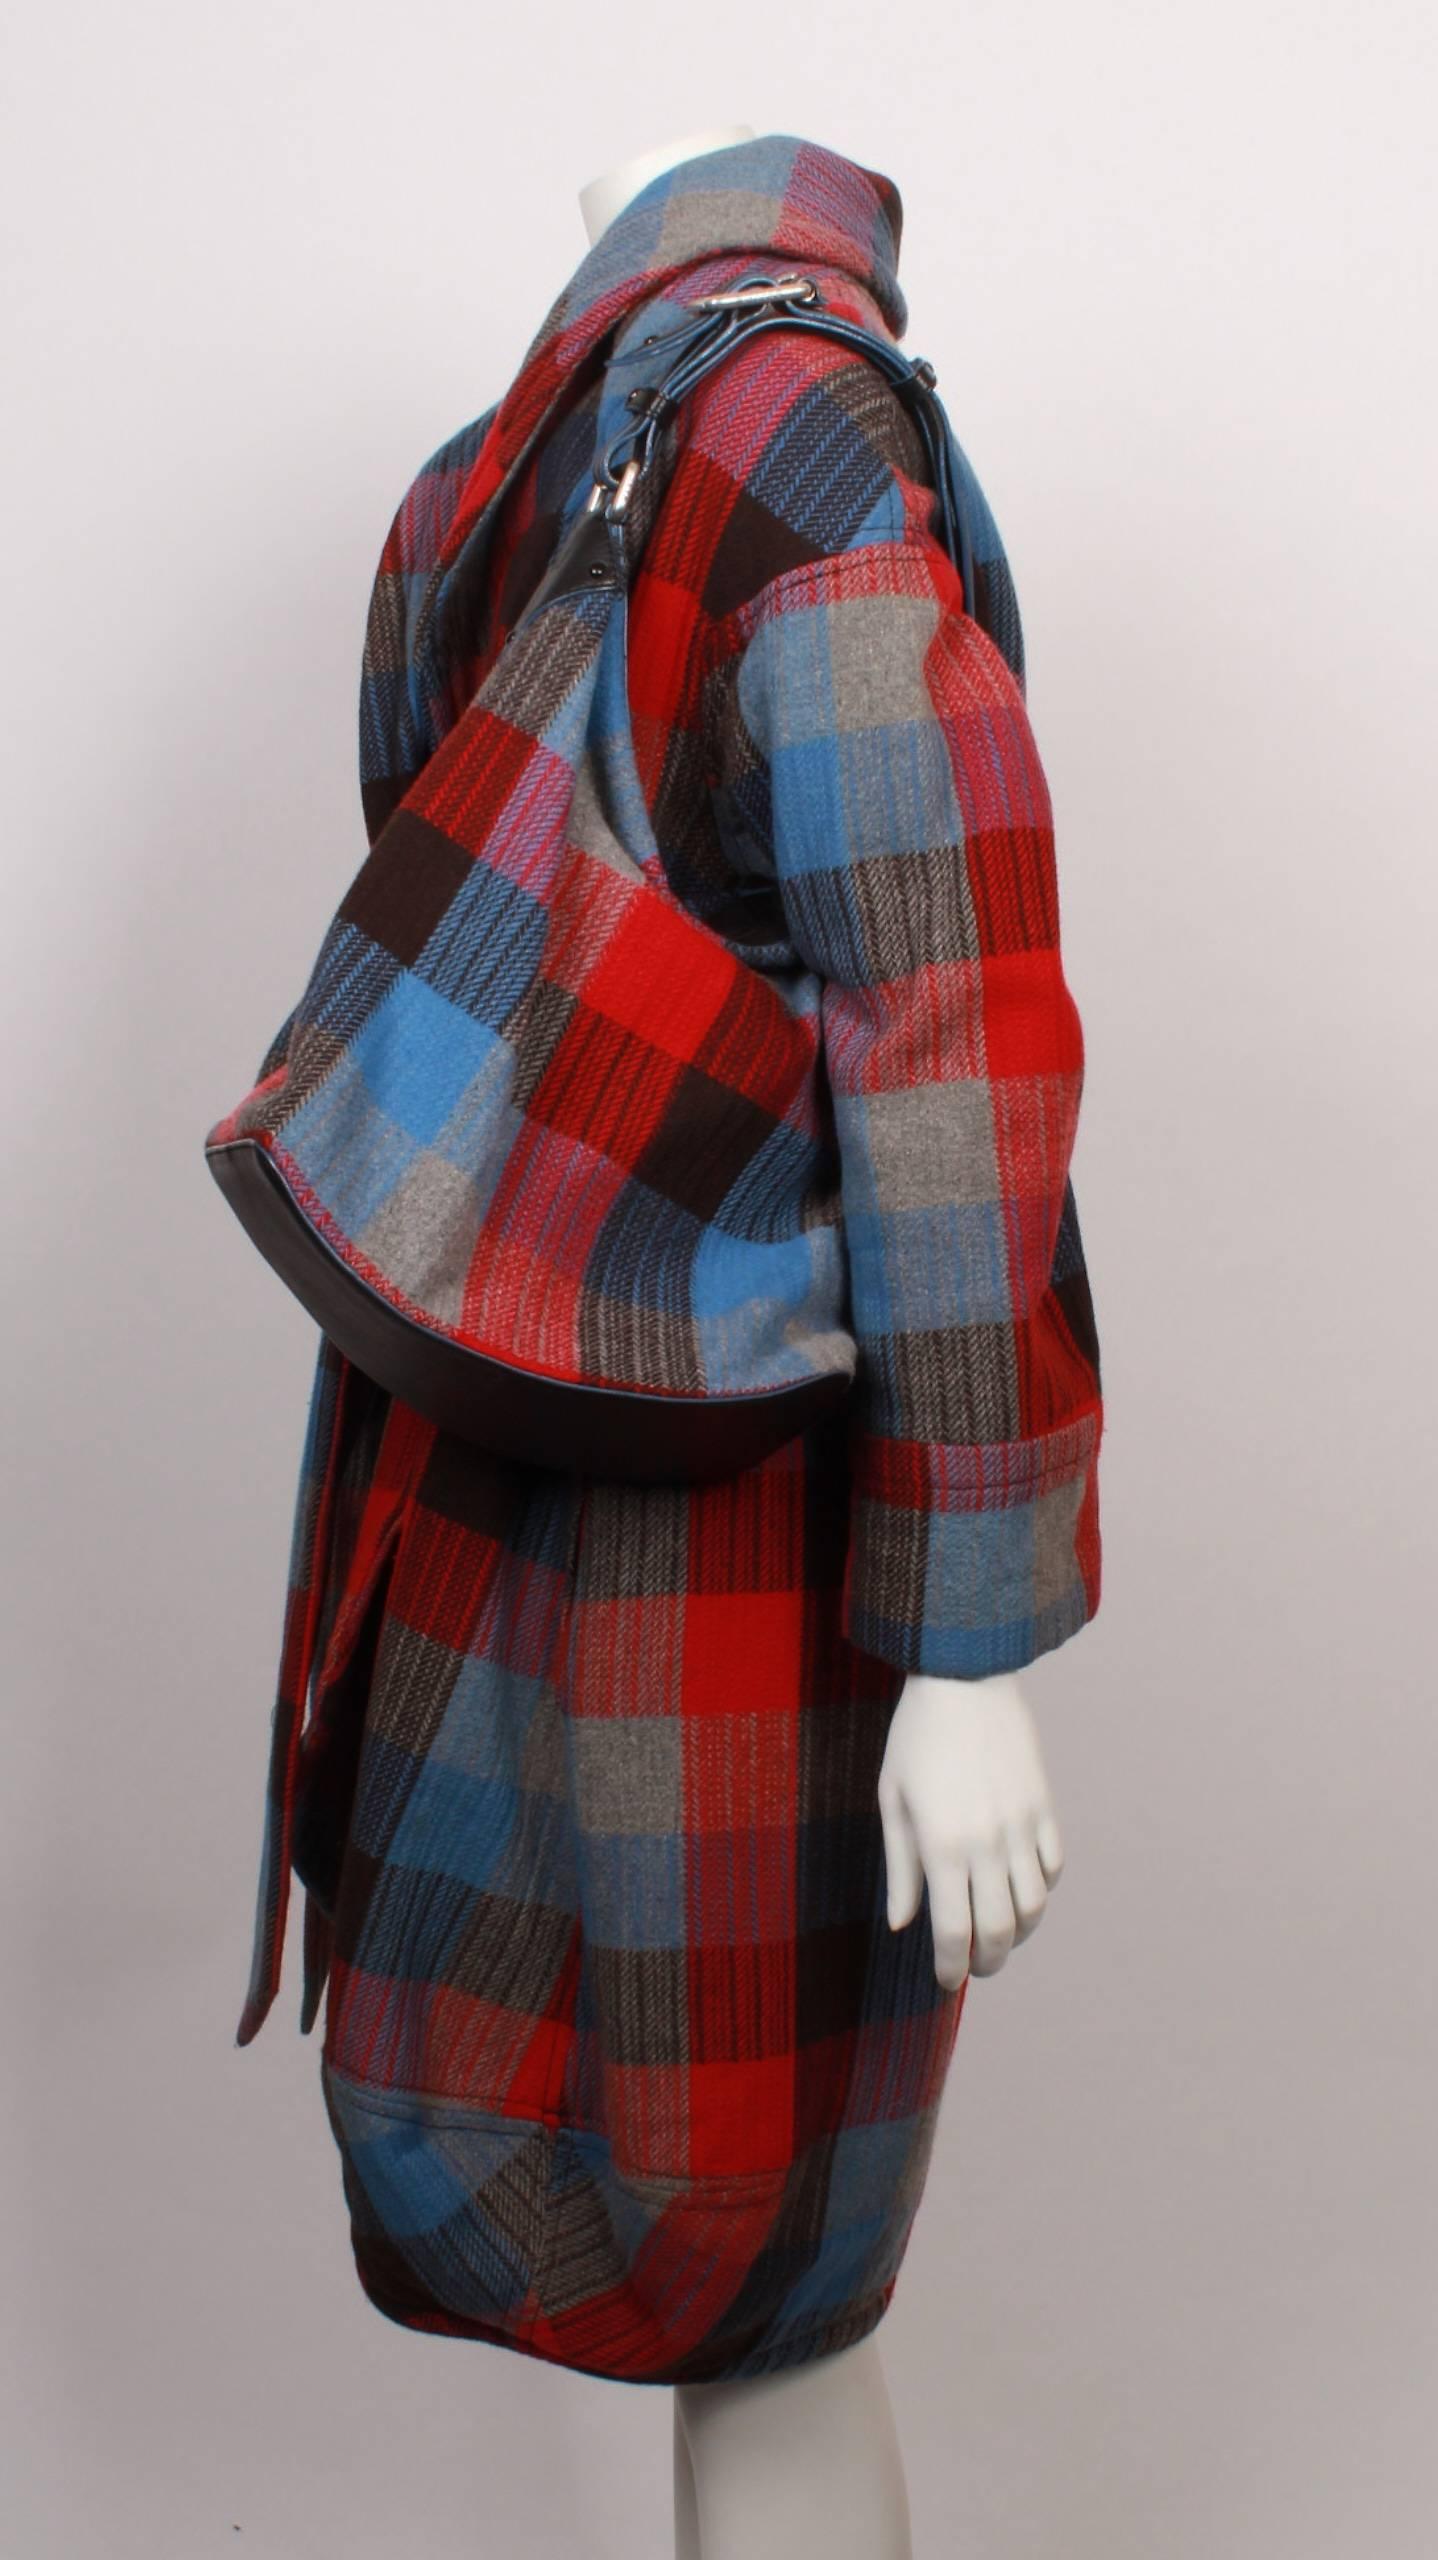 Marc Jacobs black, red, grey and blue checked wool flannel wrap coat & matching shoulder bag. 
Coat has roll collar, bubble hemline and wide tie belt. 
Bag measures 29cmH x 39cmW x 15cmD and features outside zip pocket, inside zip pocket and